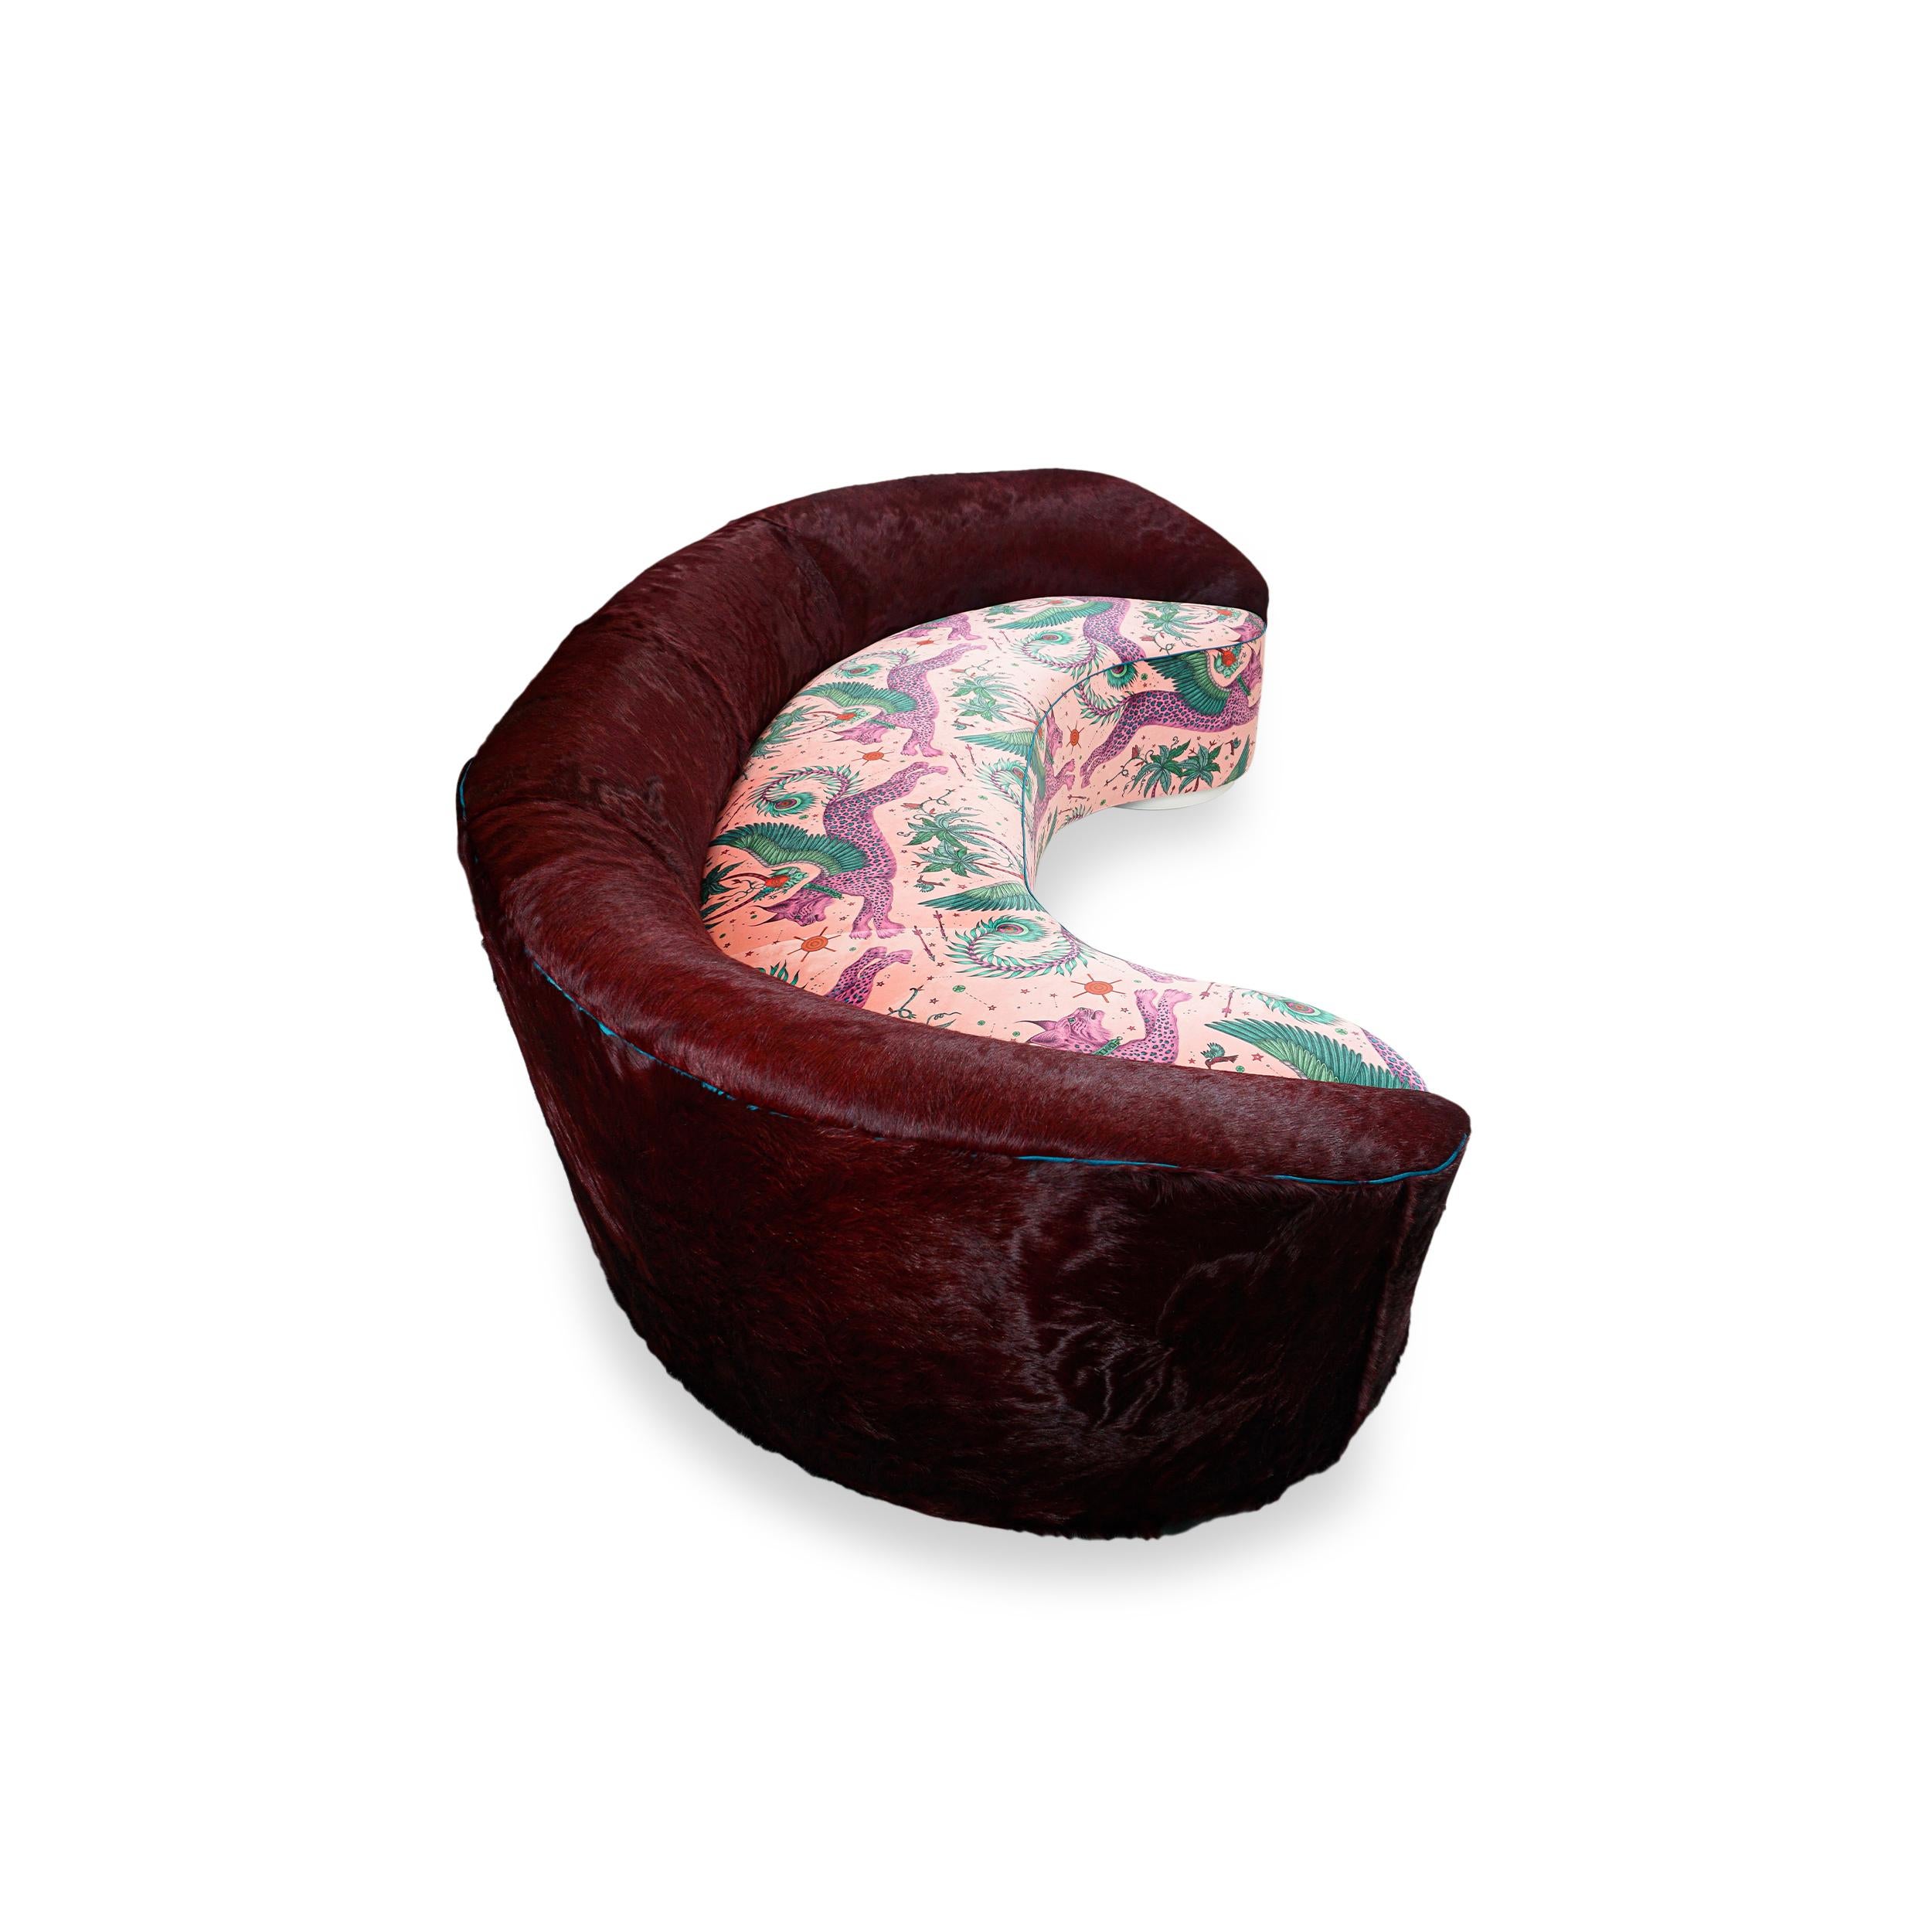 Curved Sofa with Oxblood Cowhide and Fantastical Printed Velvet, Slope Arm For Sale 2